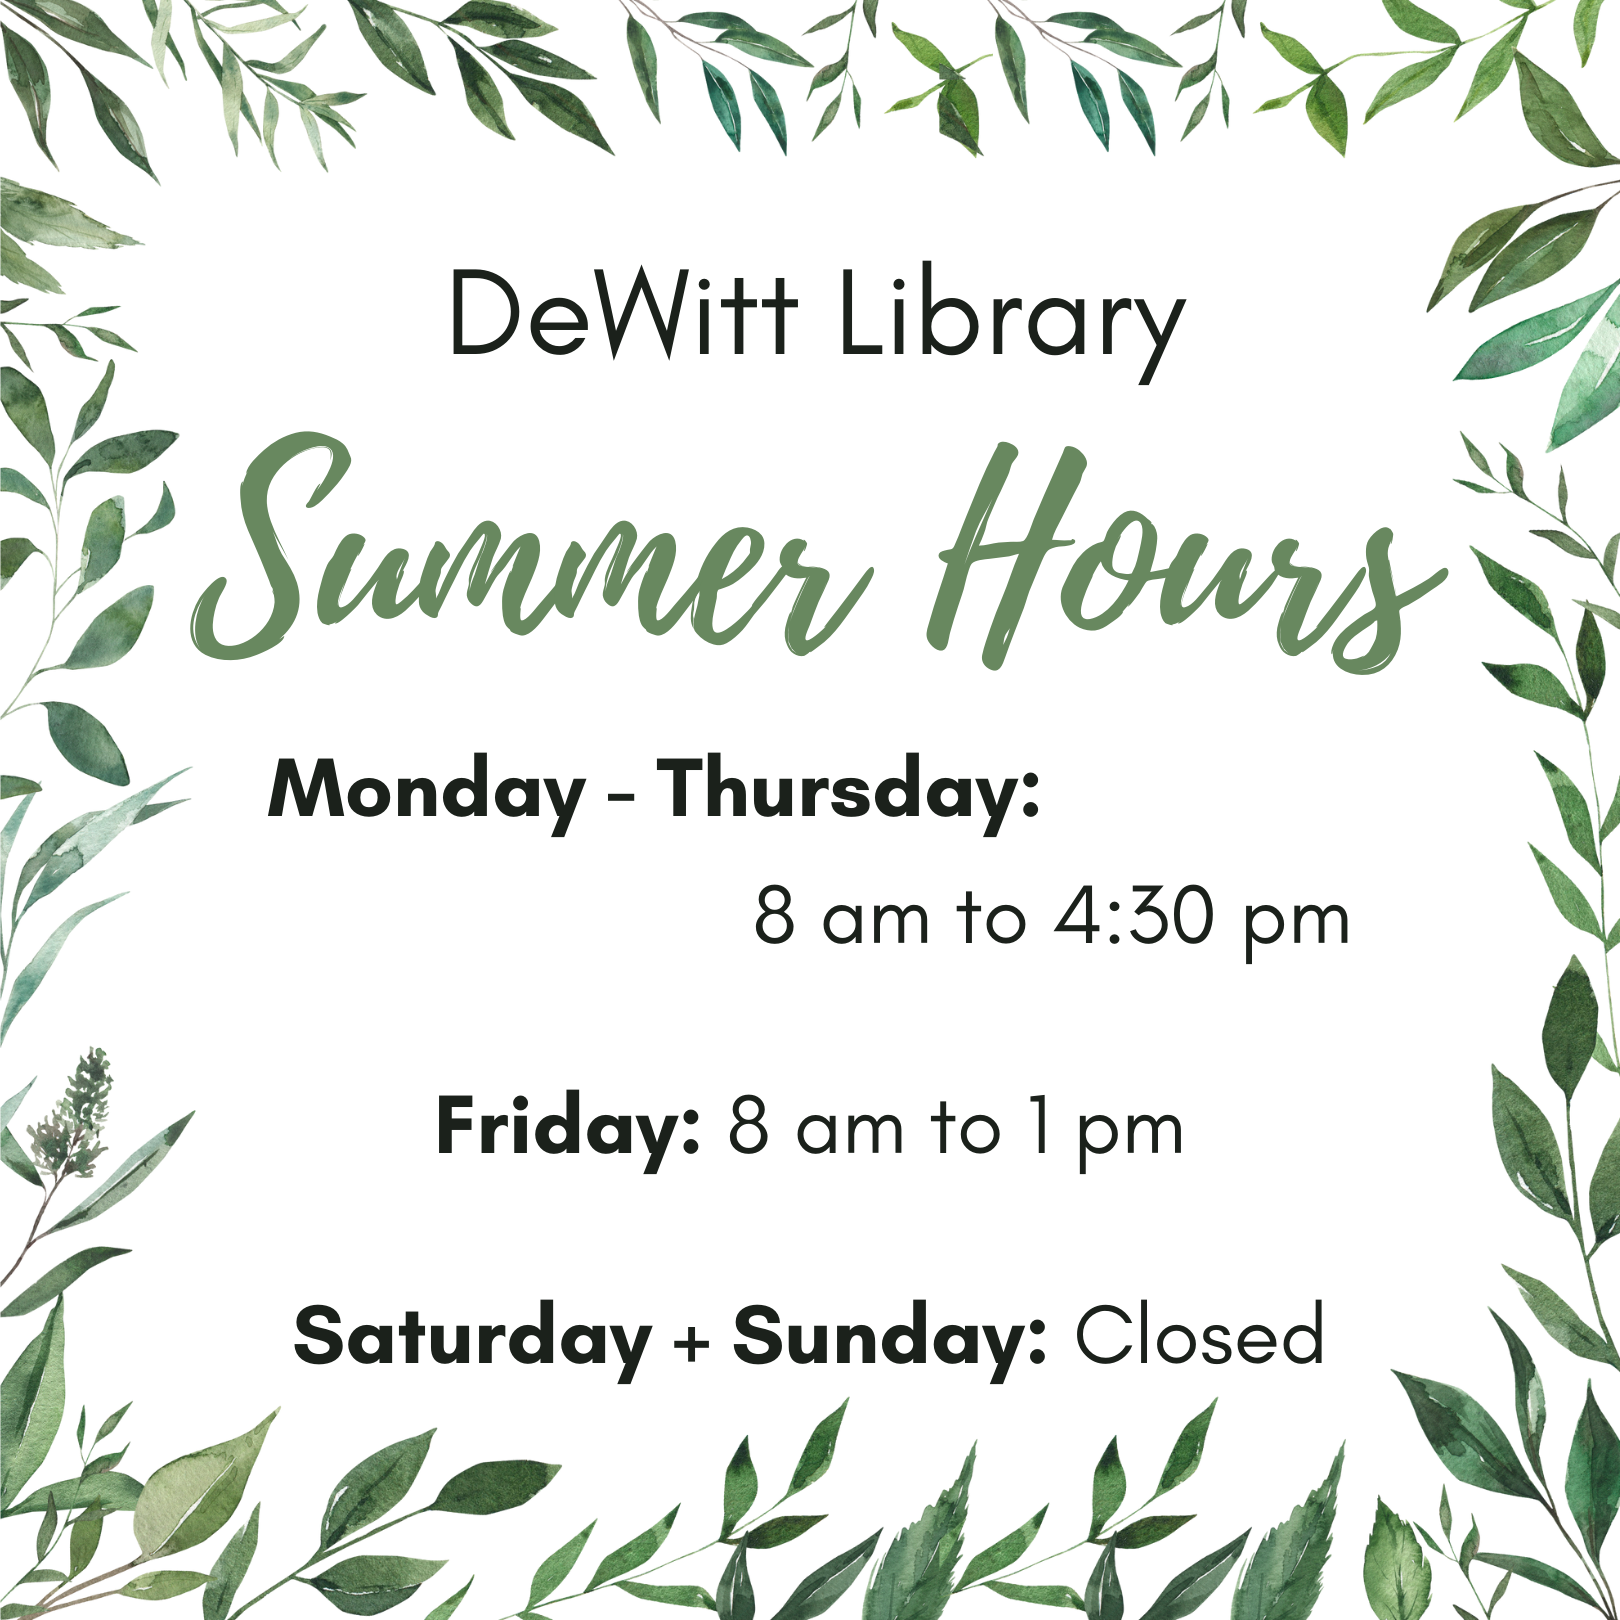 DeWitt Library Summer Hours: Monday - Thursday: 8 am to 4:30 pm; Friday: 8 am to 1 pm; Saturday + Sunday: Closed.